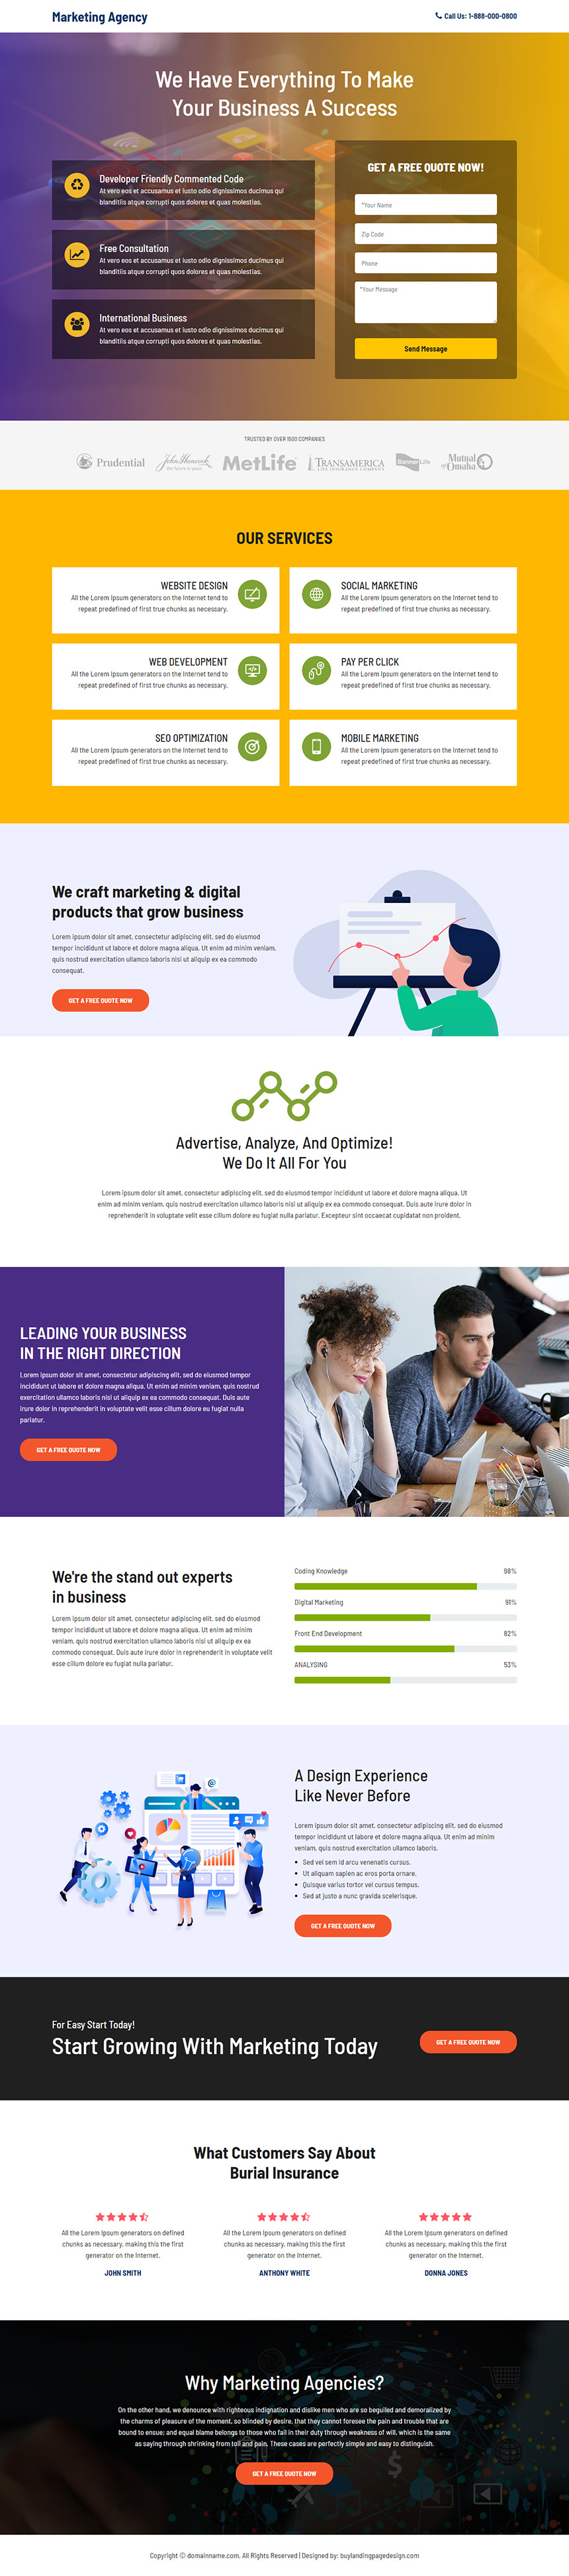 marketing agency lead capture responsive landing page